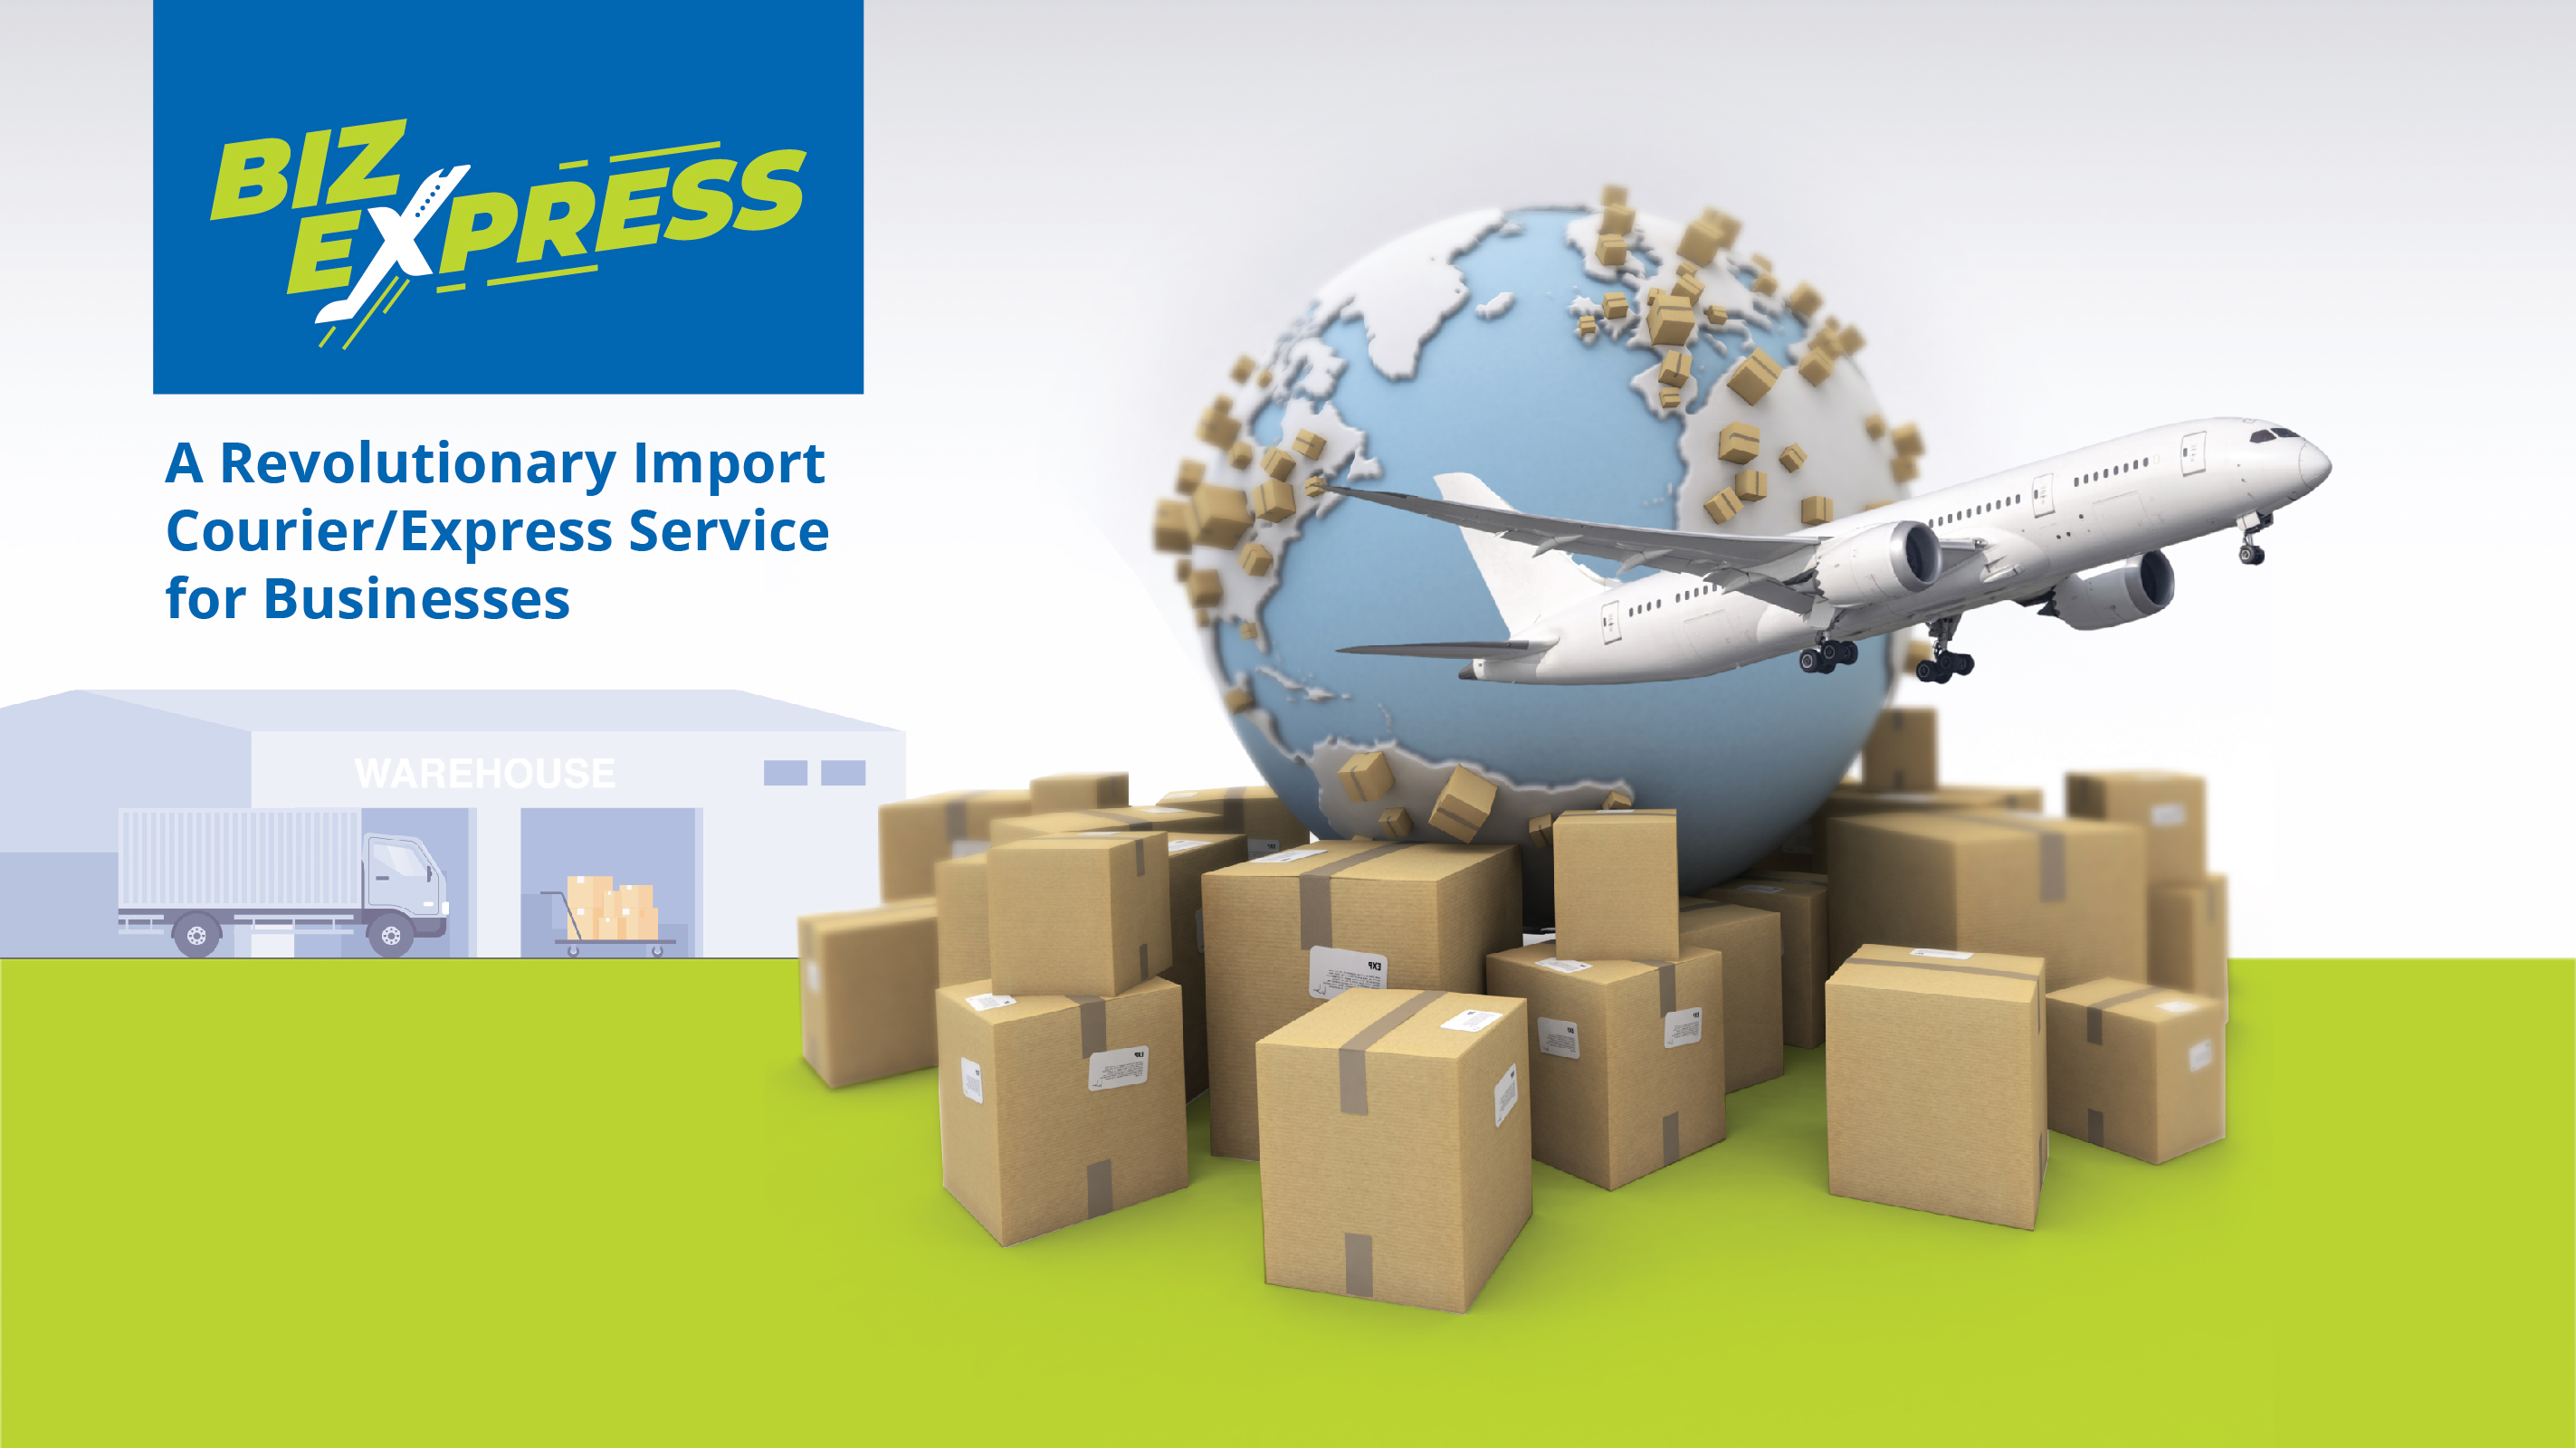 BizExpress: A Revolutionary Import Courier/Express Service for Businesses